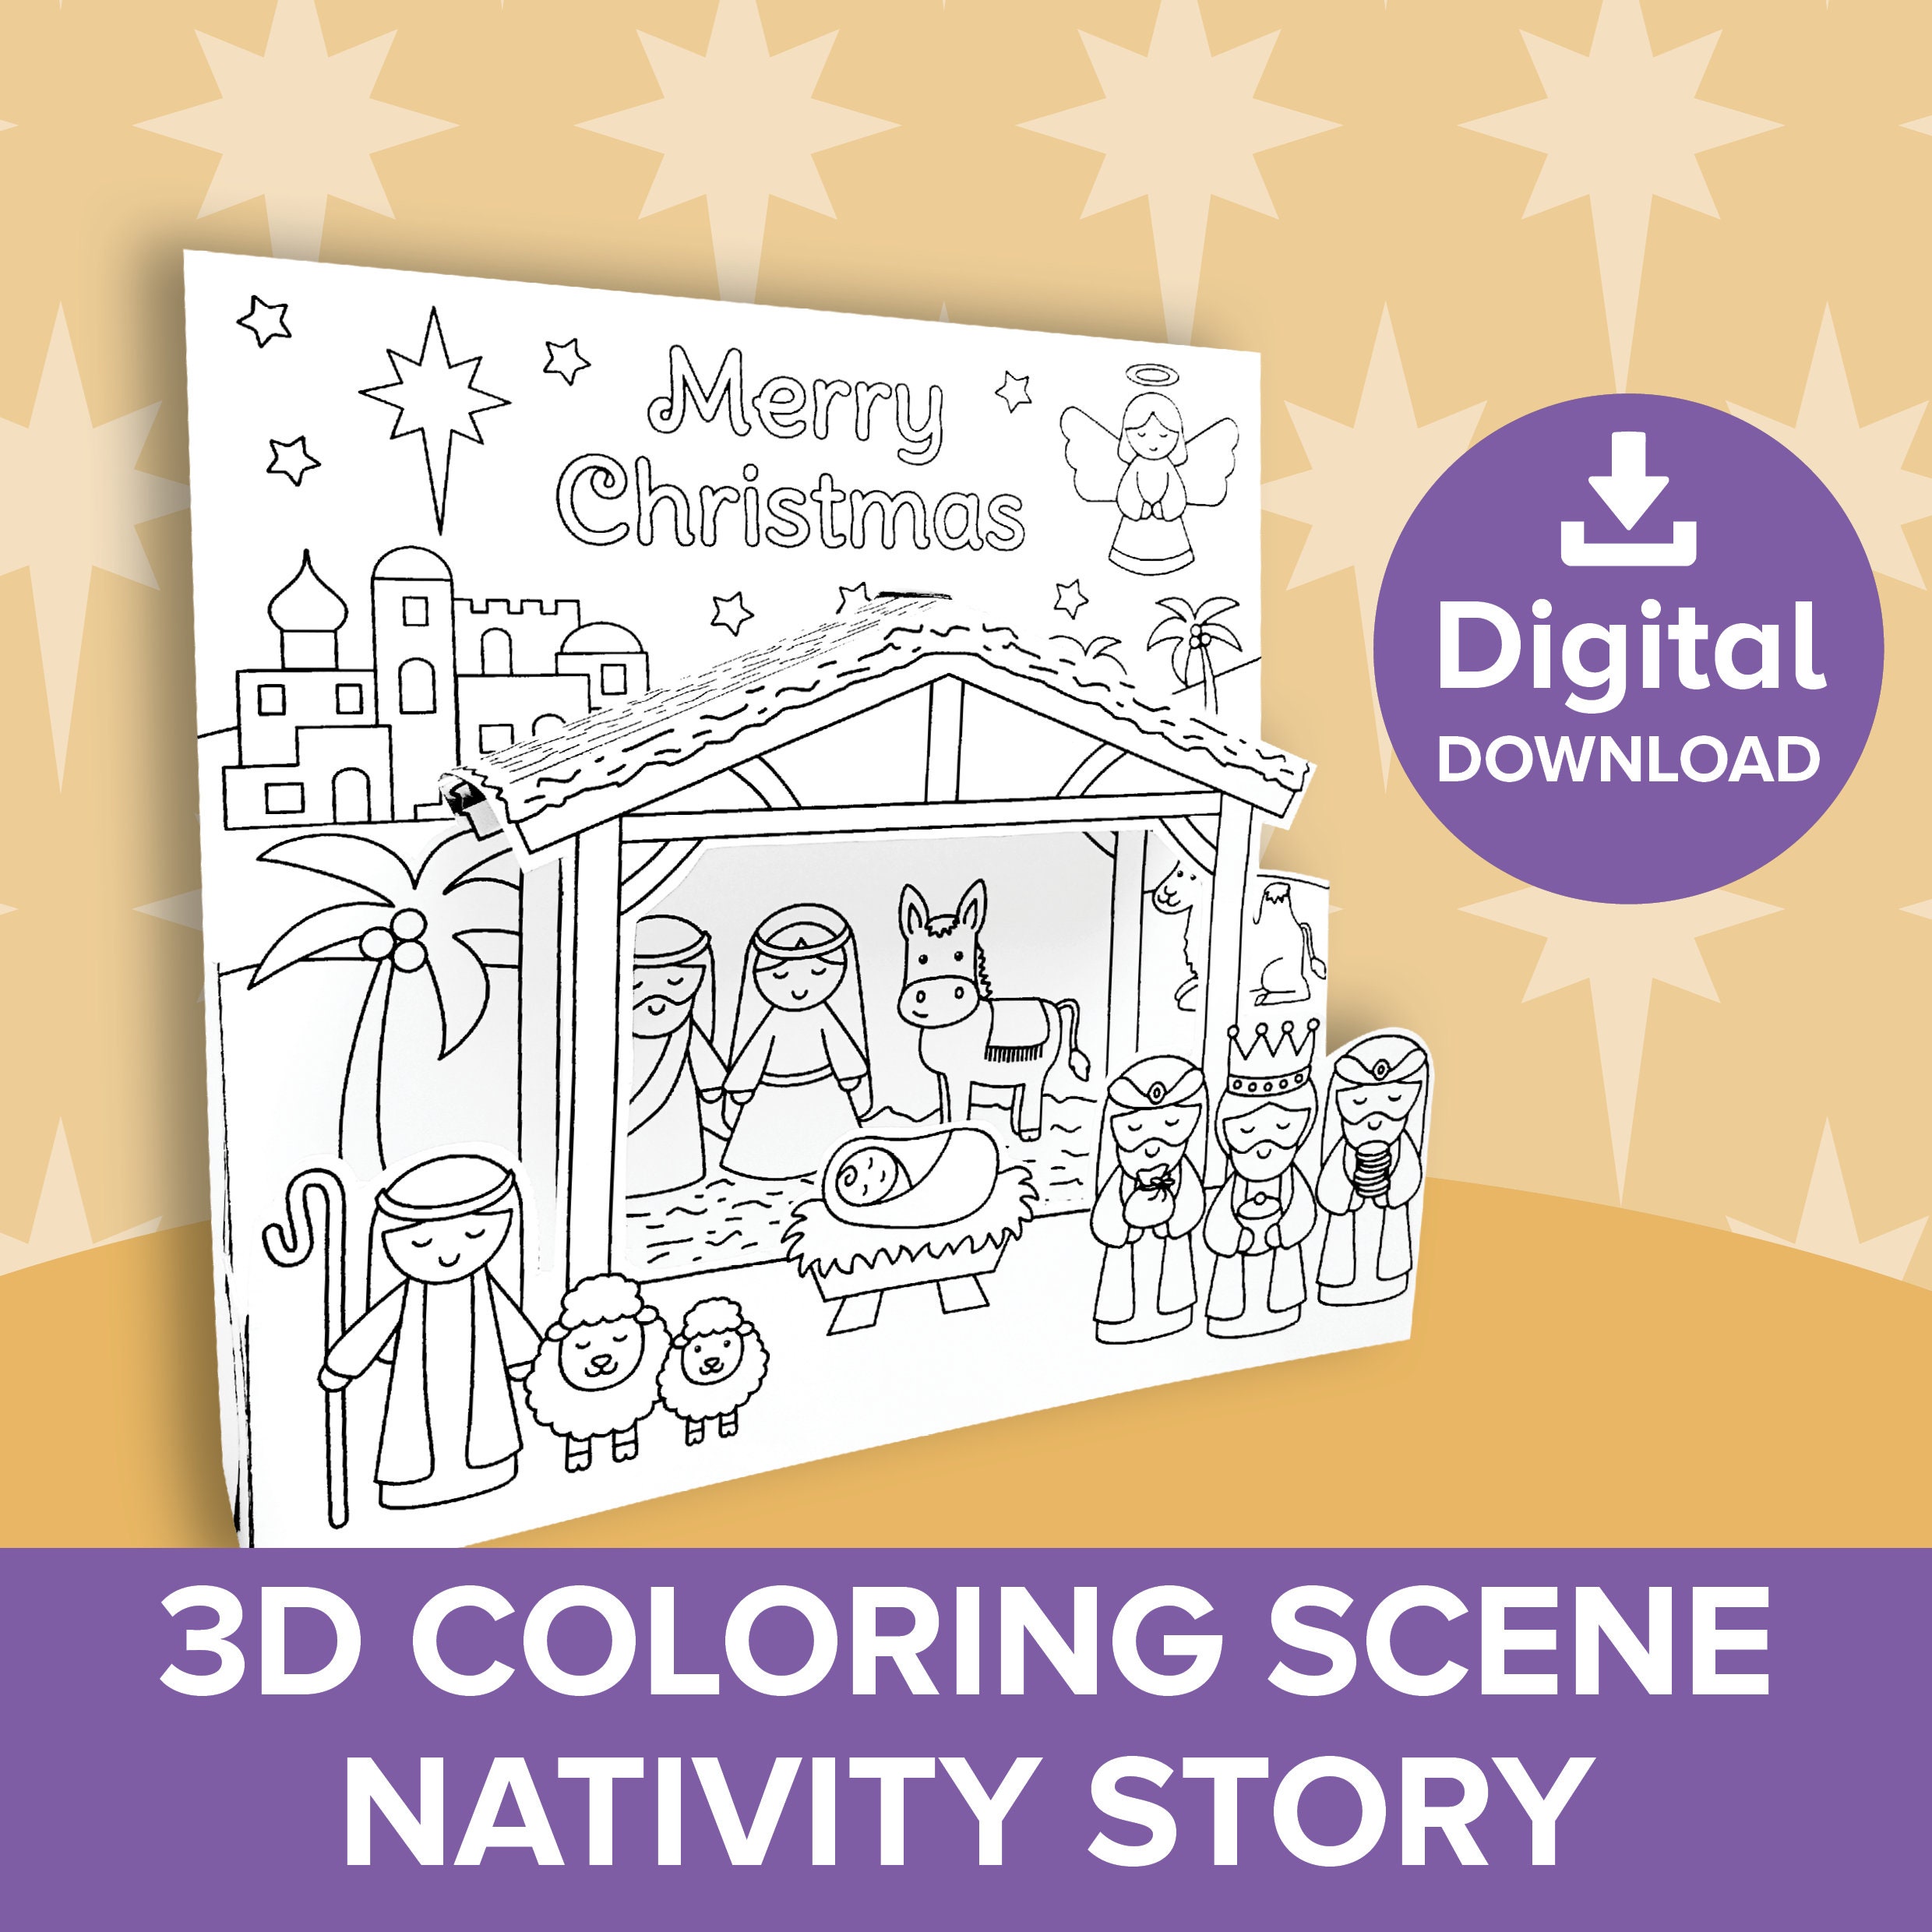 Christmas Story Coloring Pages - Bible Crafts and Activities